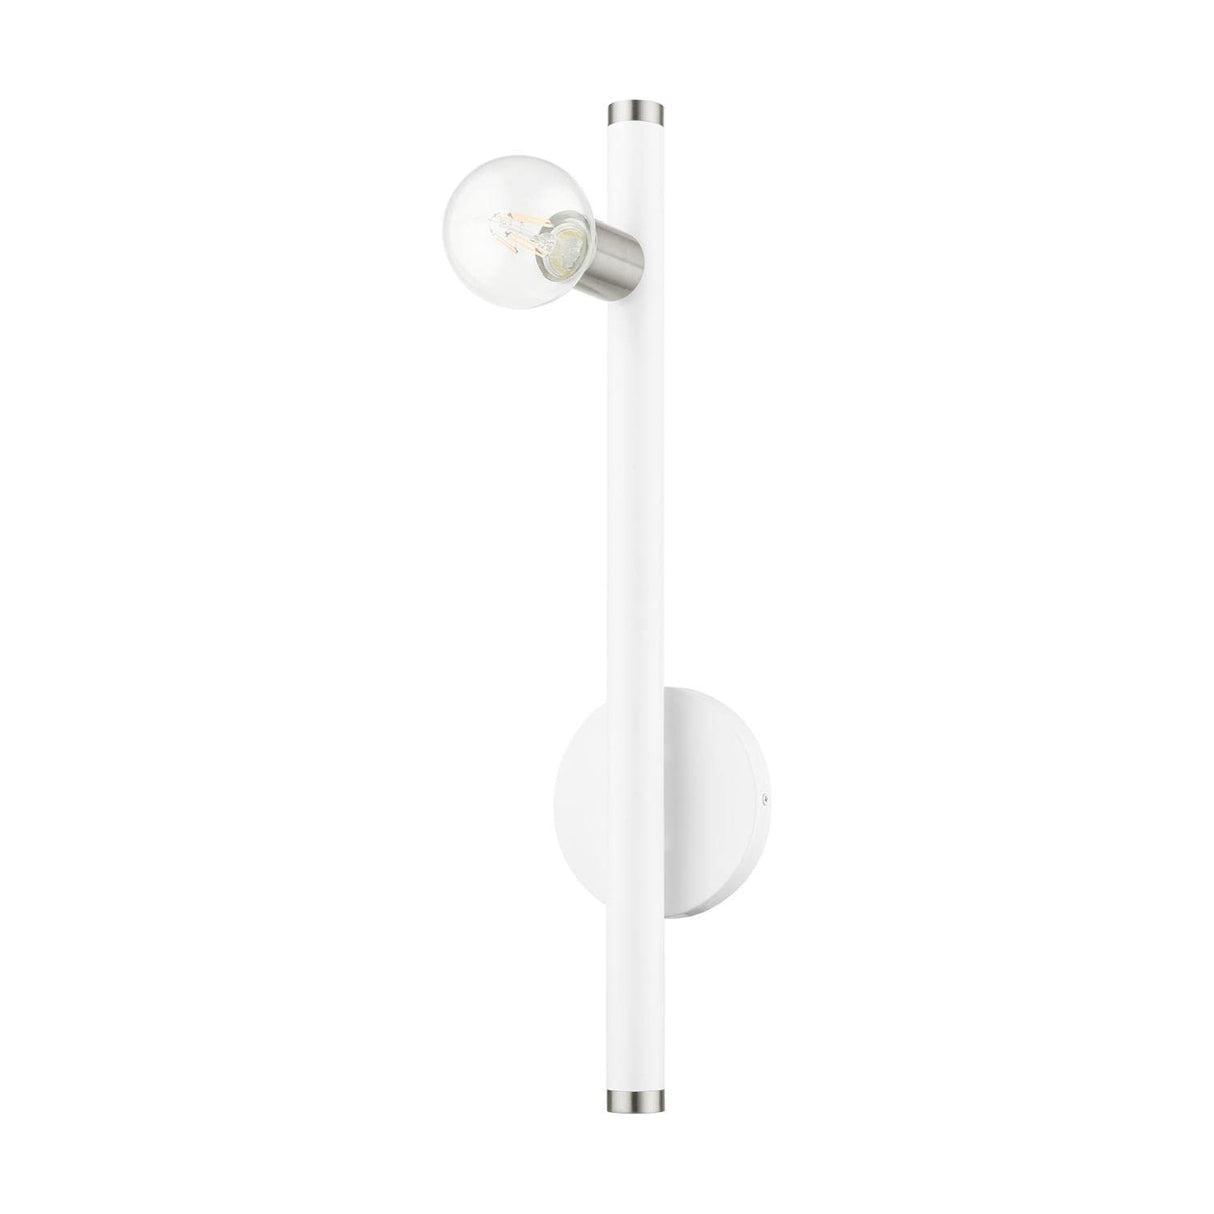 Livex Lighting Bannister 1 Light Wall Sconce White Finish with Brushed Nickel Finish Accents